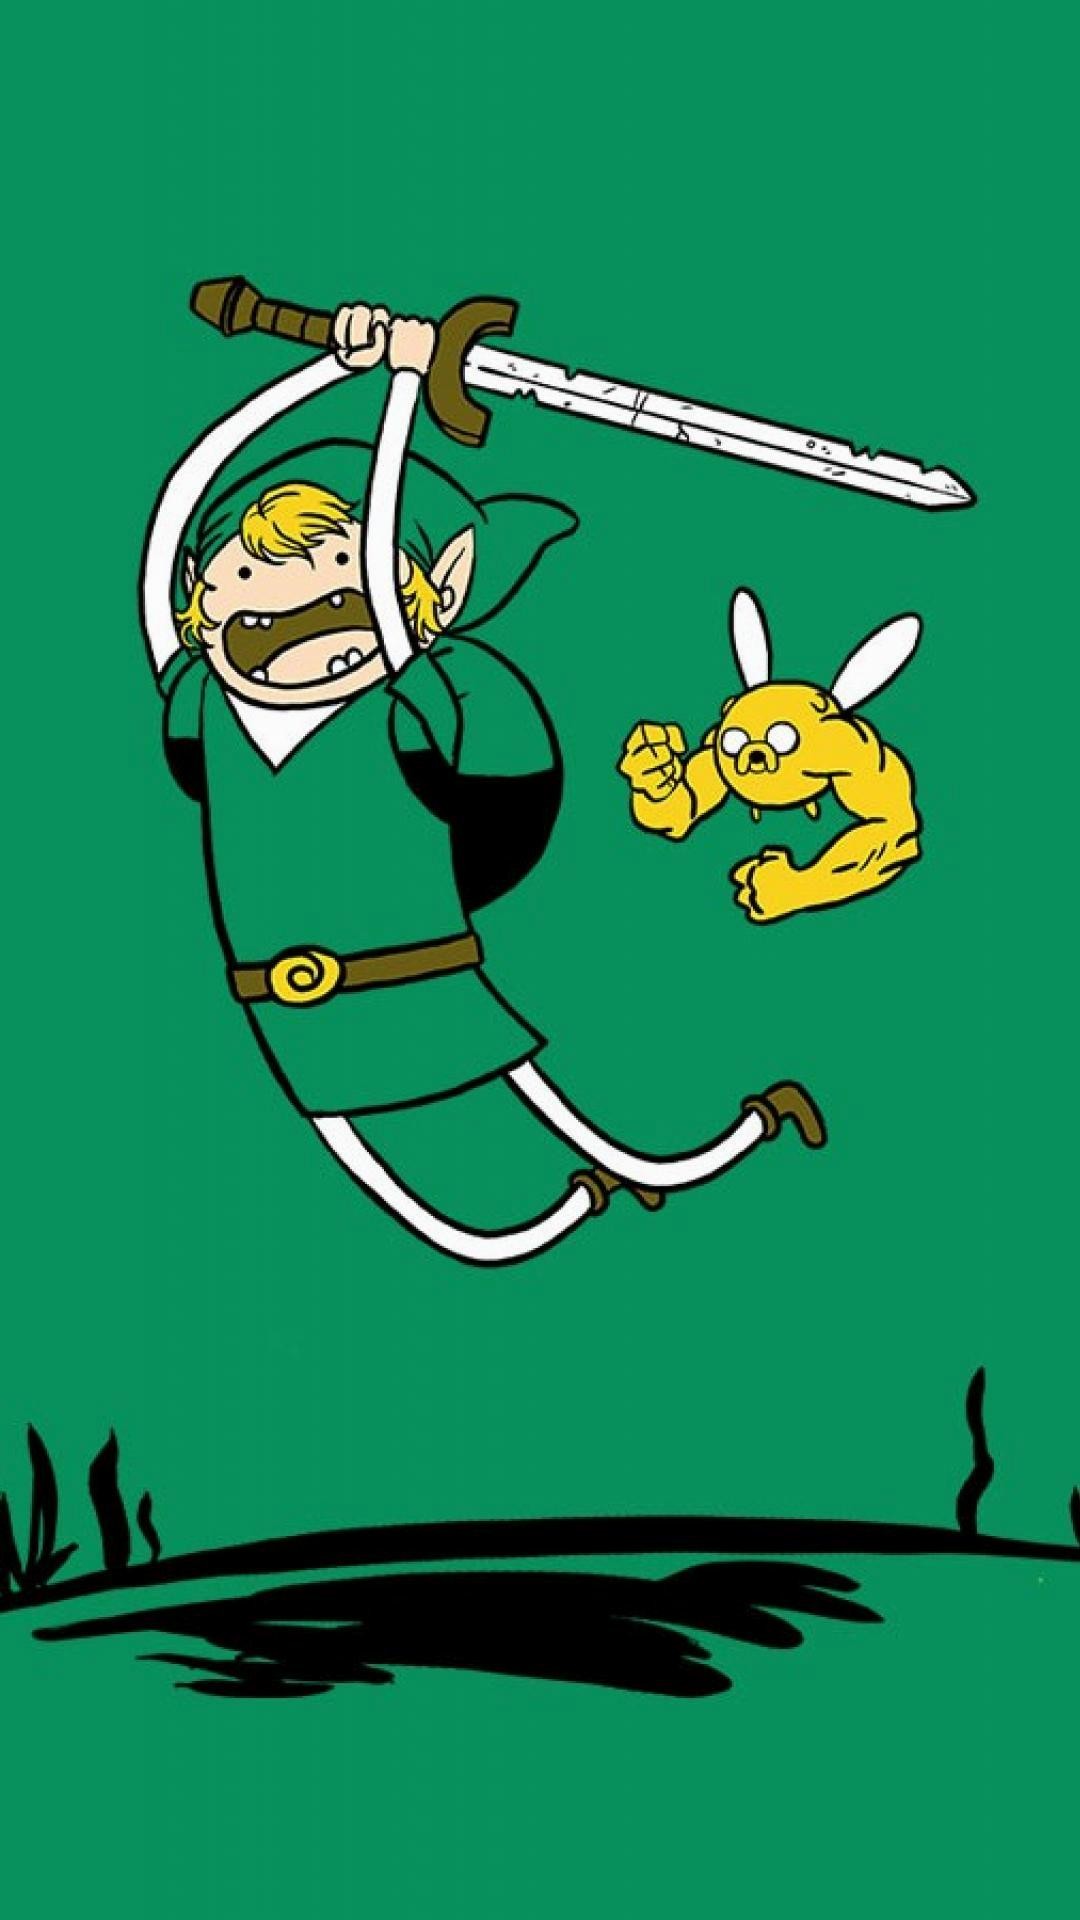 Wallpaper.wiki Adventure Time Iphone Background Download Free